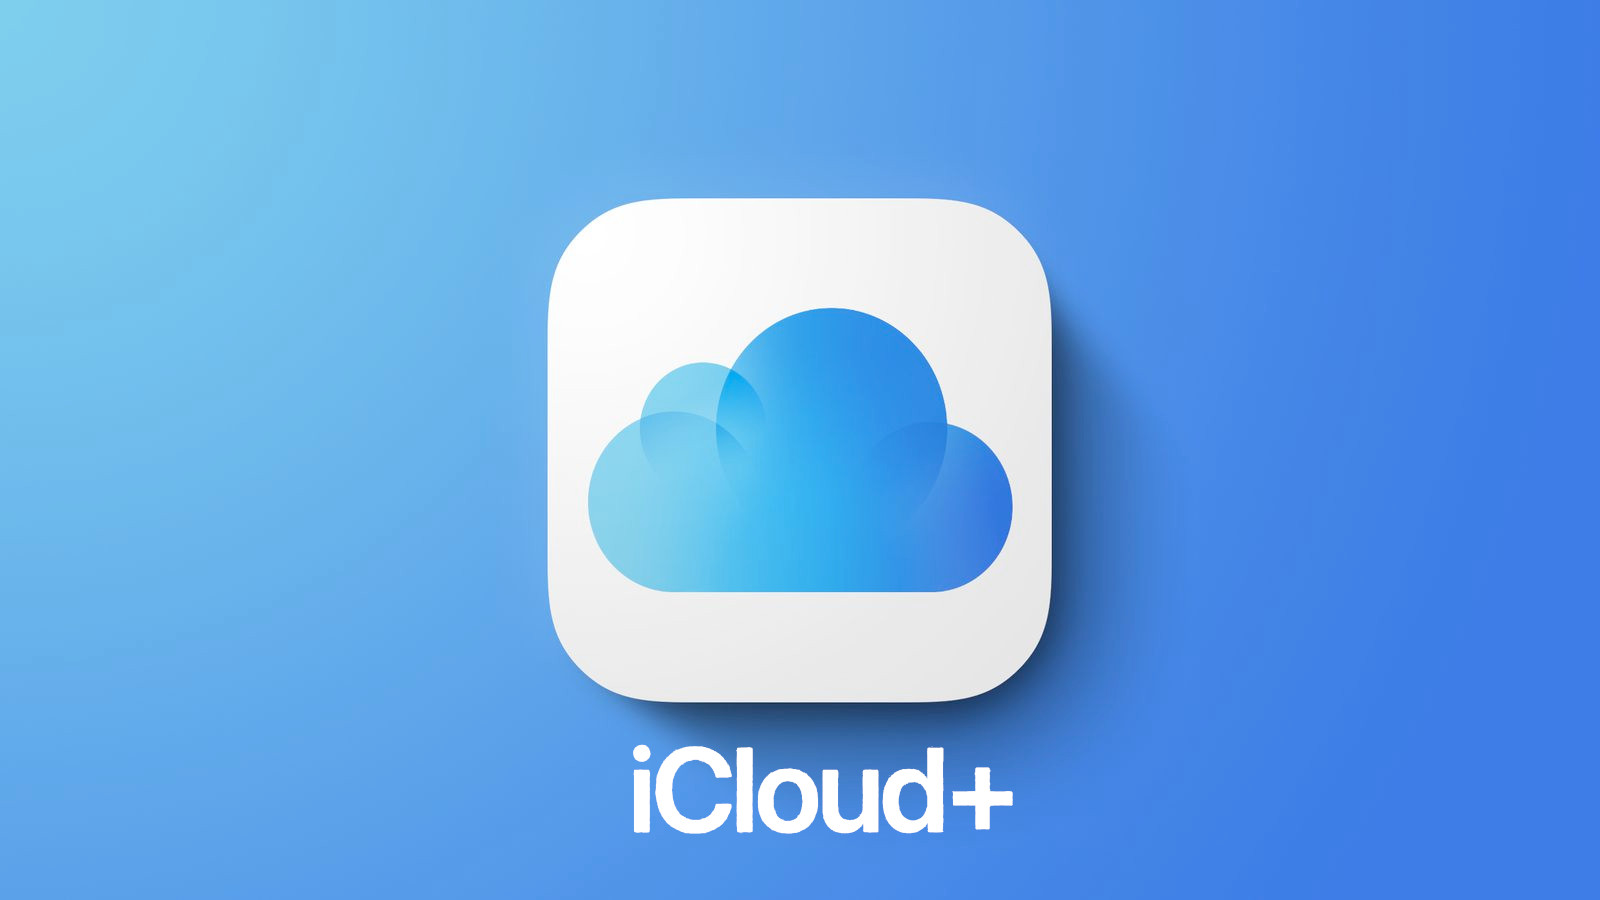 iCloud+ 50GB - 3 Months Trial Subscription US (ONLY FOR NEW ACCOUNTS), 0.31$